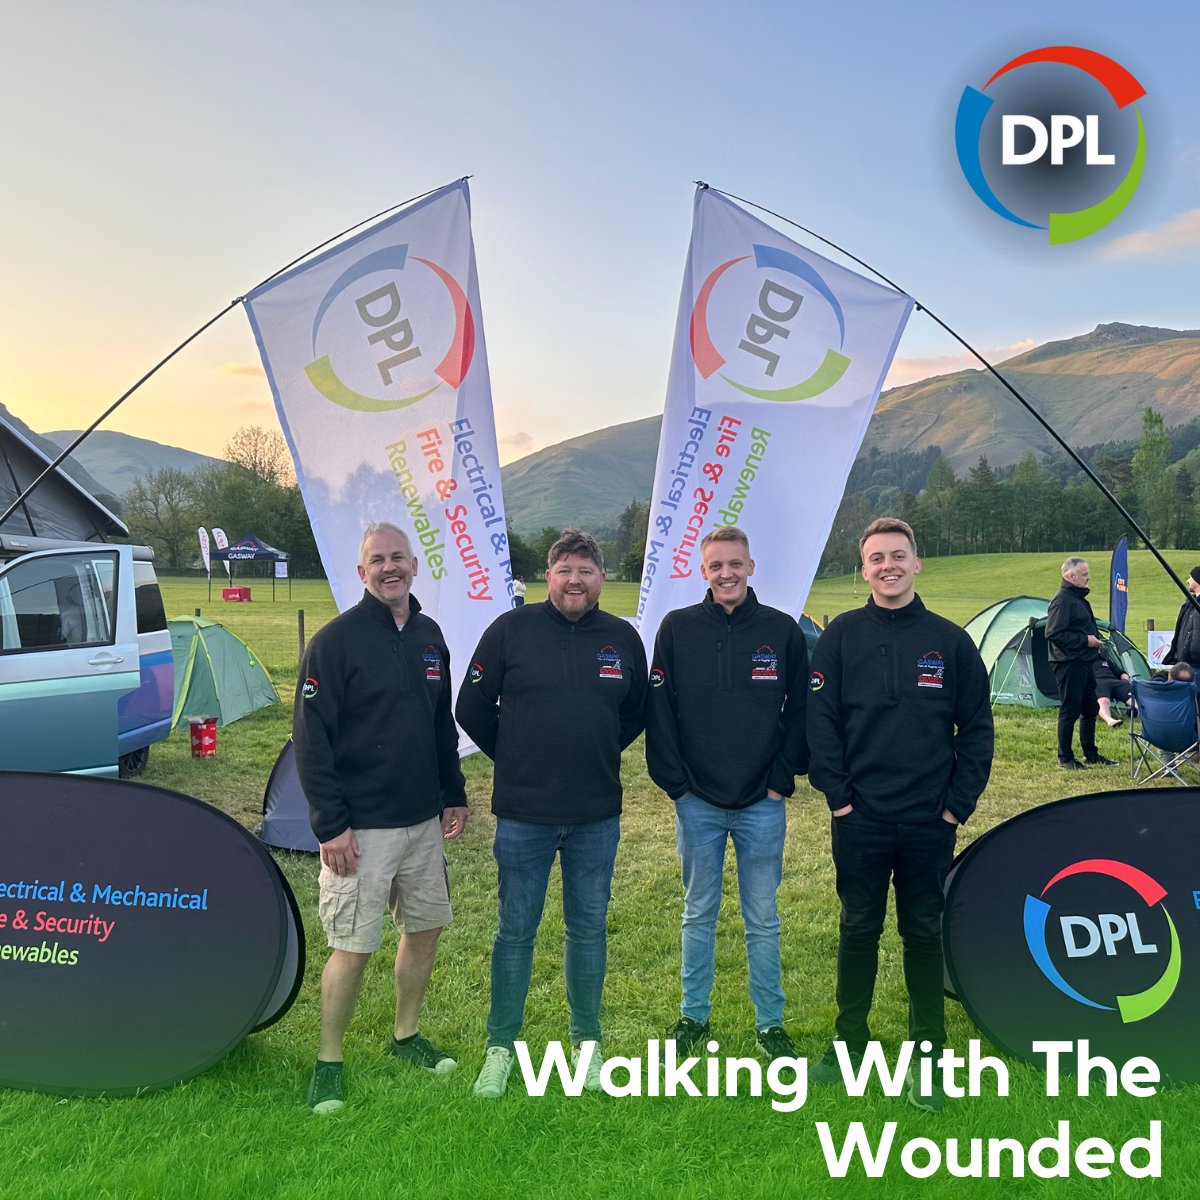 DPL group had a great time doing ‘The Tough’ route as part of The Cumbrian Challenge this weekend; for @supportthewalk We trekked 21 km to a 1,400m Ascent and were part of the larger @GaswayServices Team, which managed to raise over £38,000! so thank you to all who donated! #WWTW